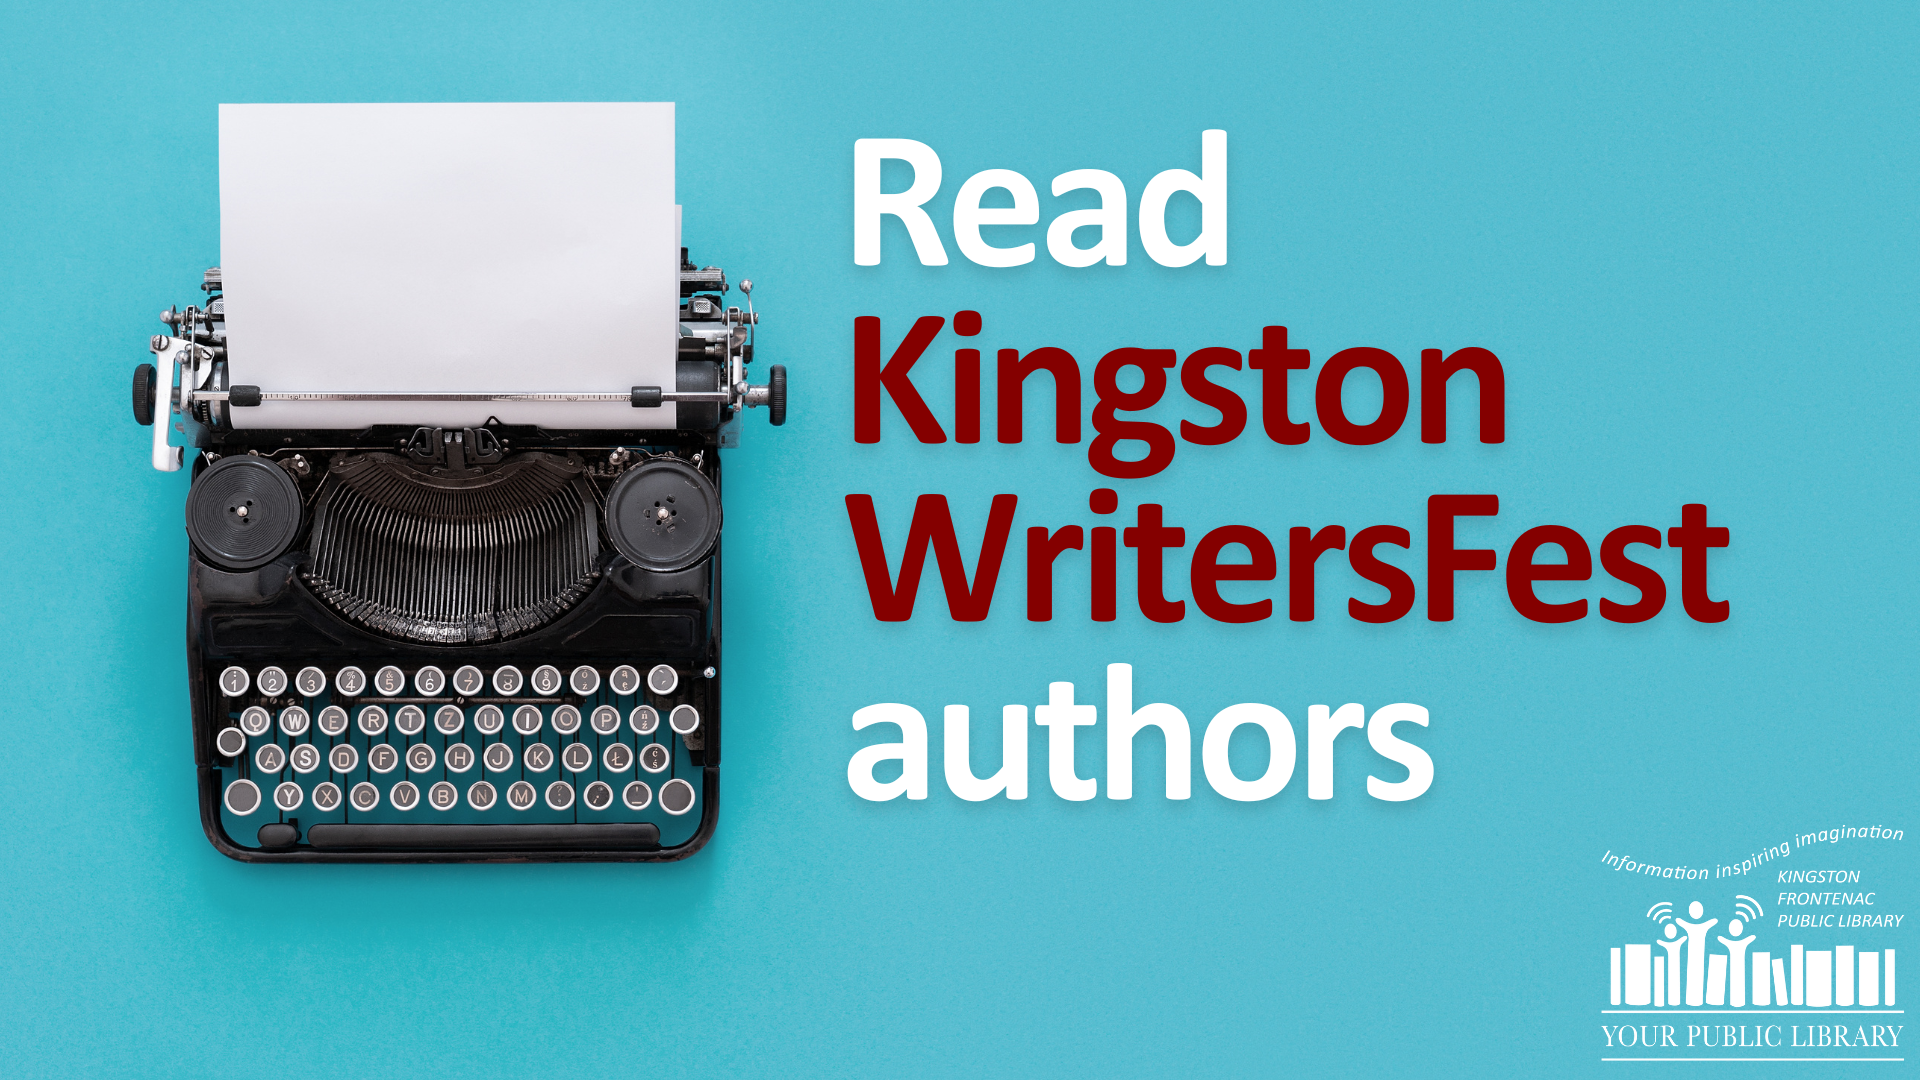 A typewriter on a turquoise background with text reading 'Read Kingston WritersFest authors'